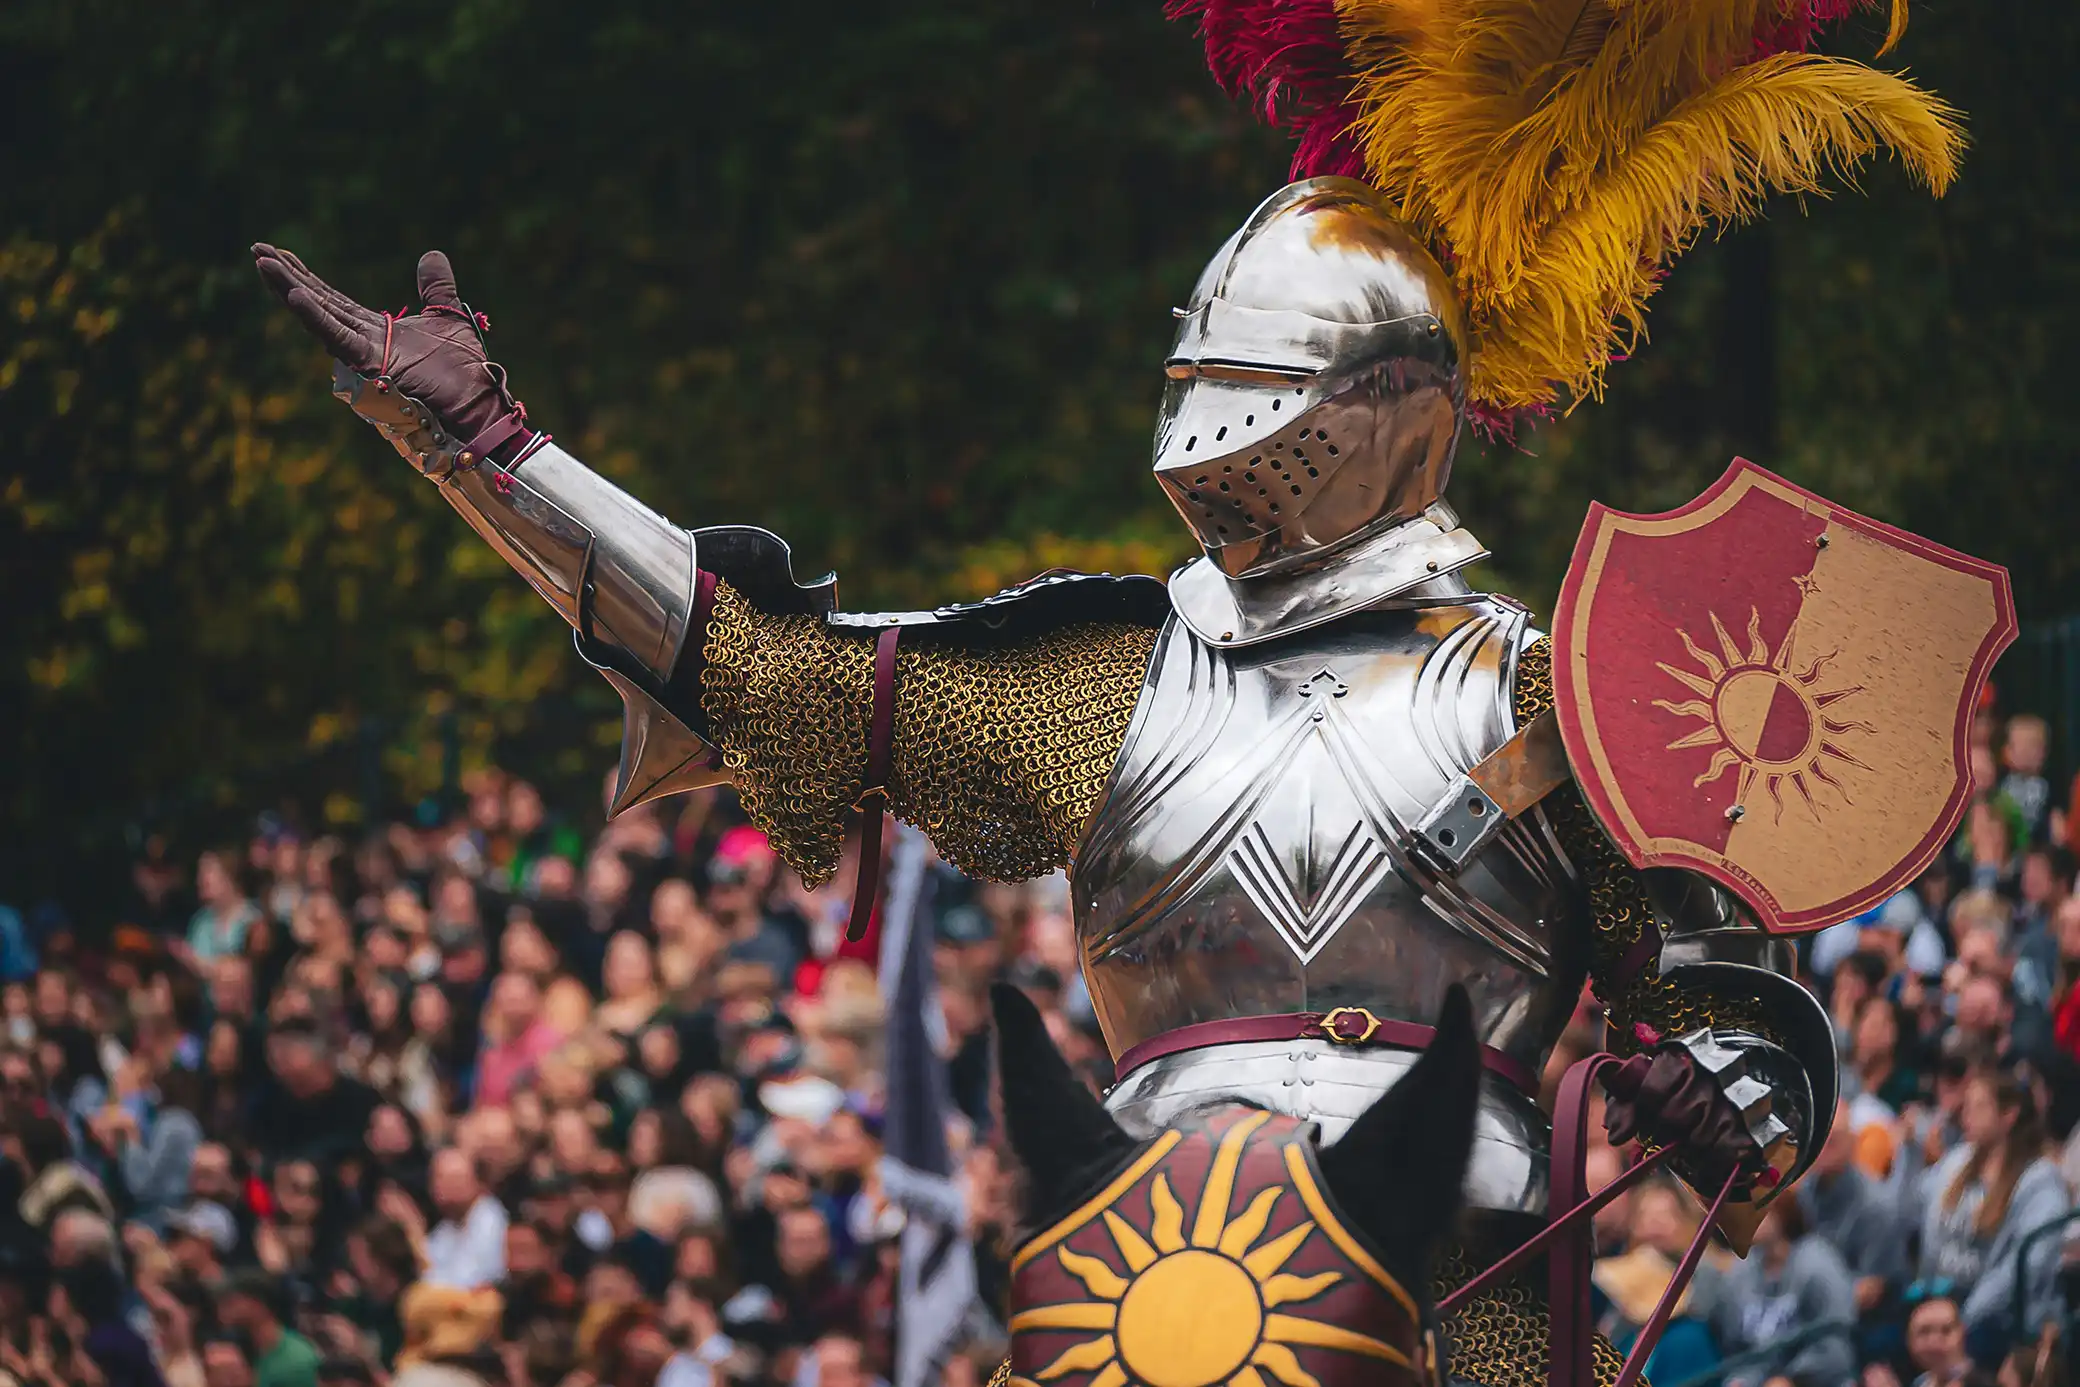 A mounted and armored knight, waving to a crowd